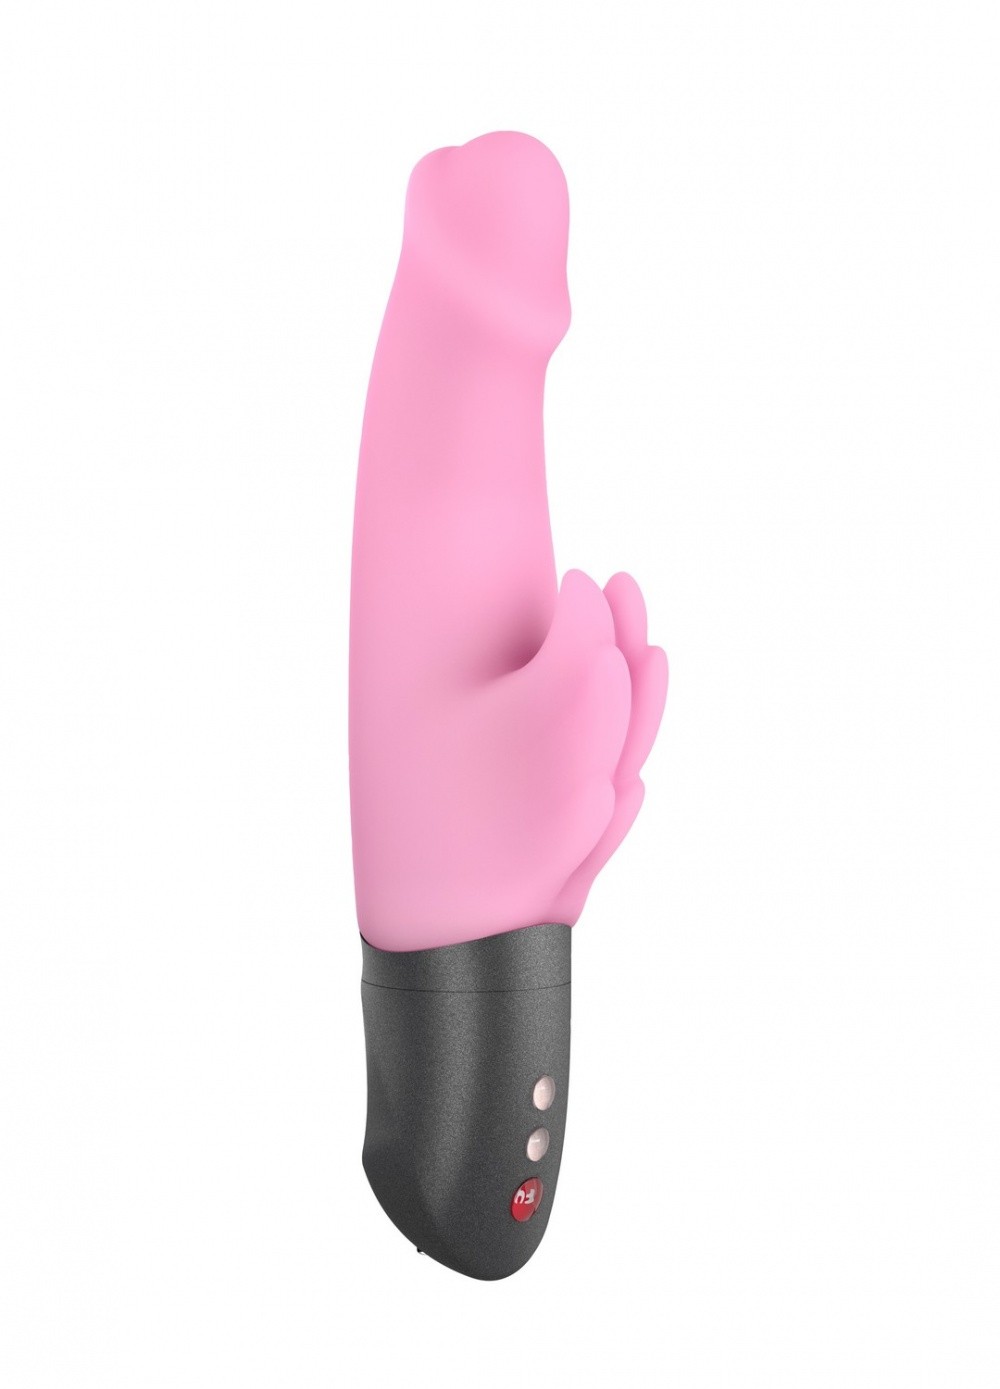 FunFactory Vibromasseur Wicked Wings Battery+ inclus rose